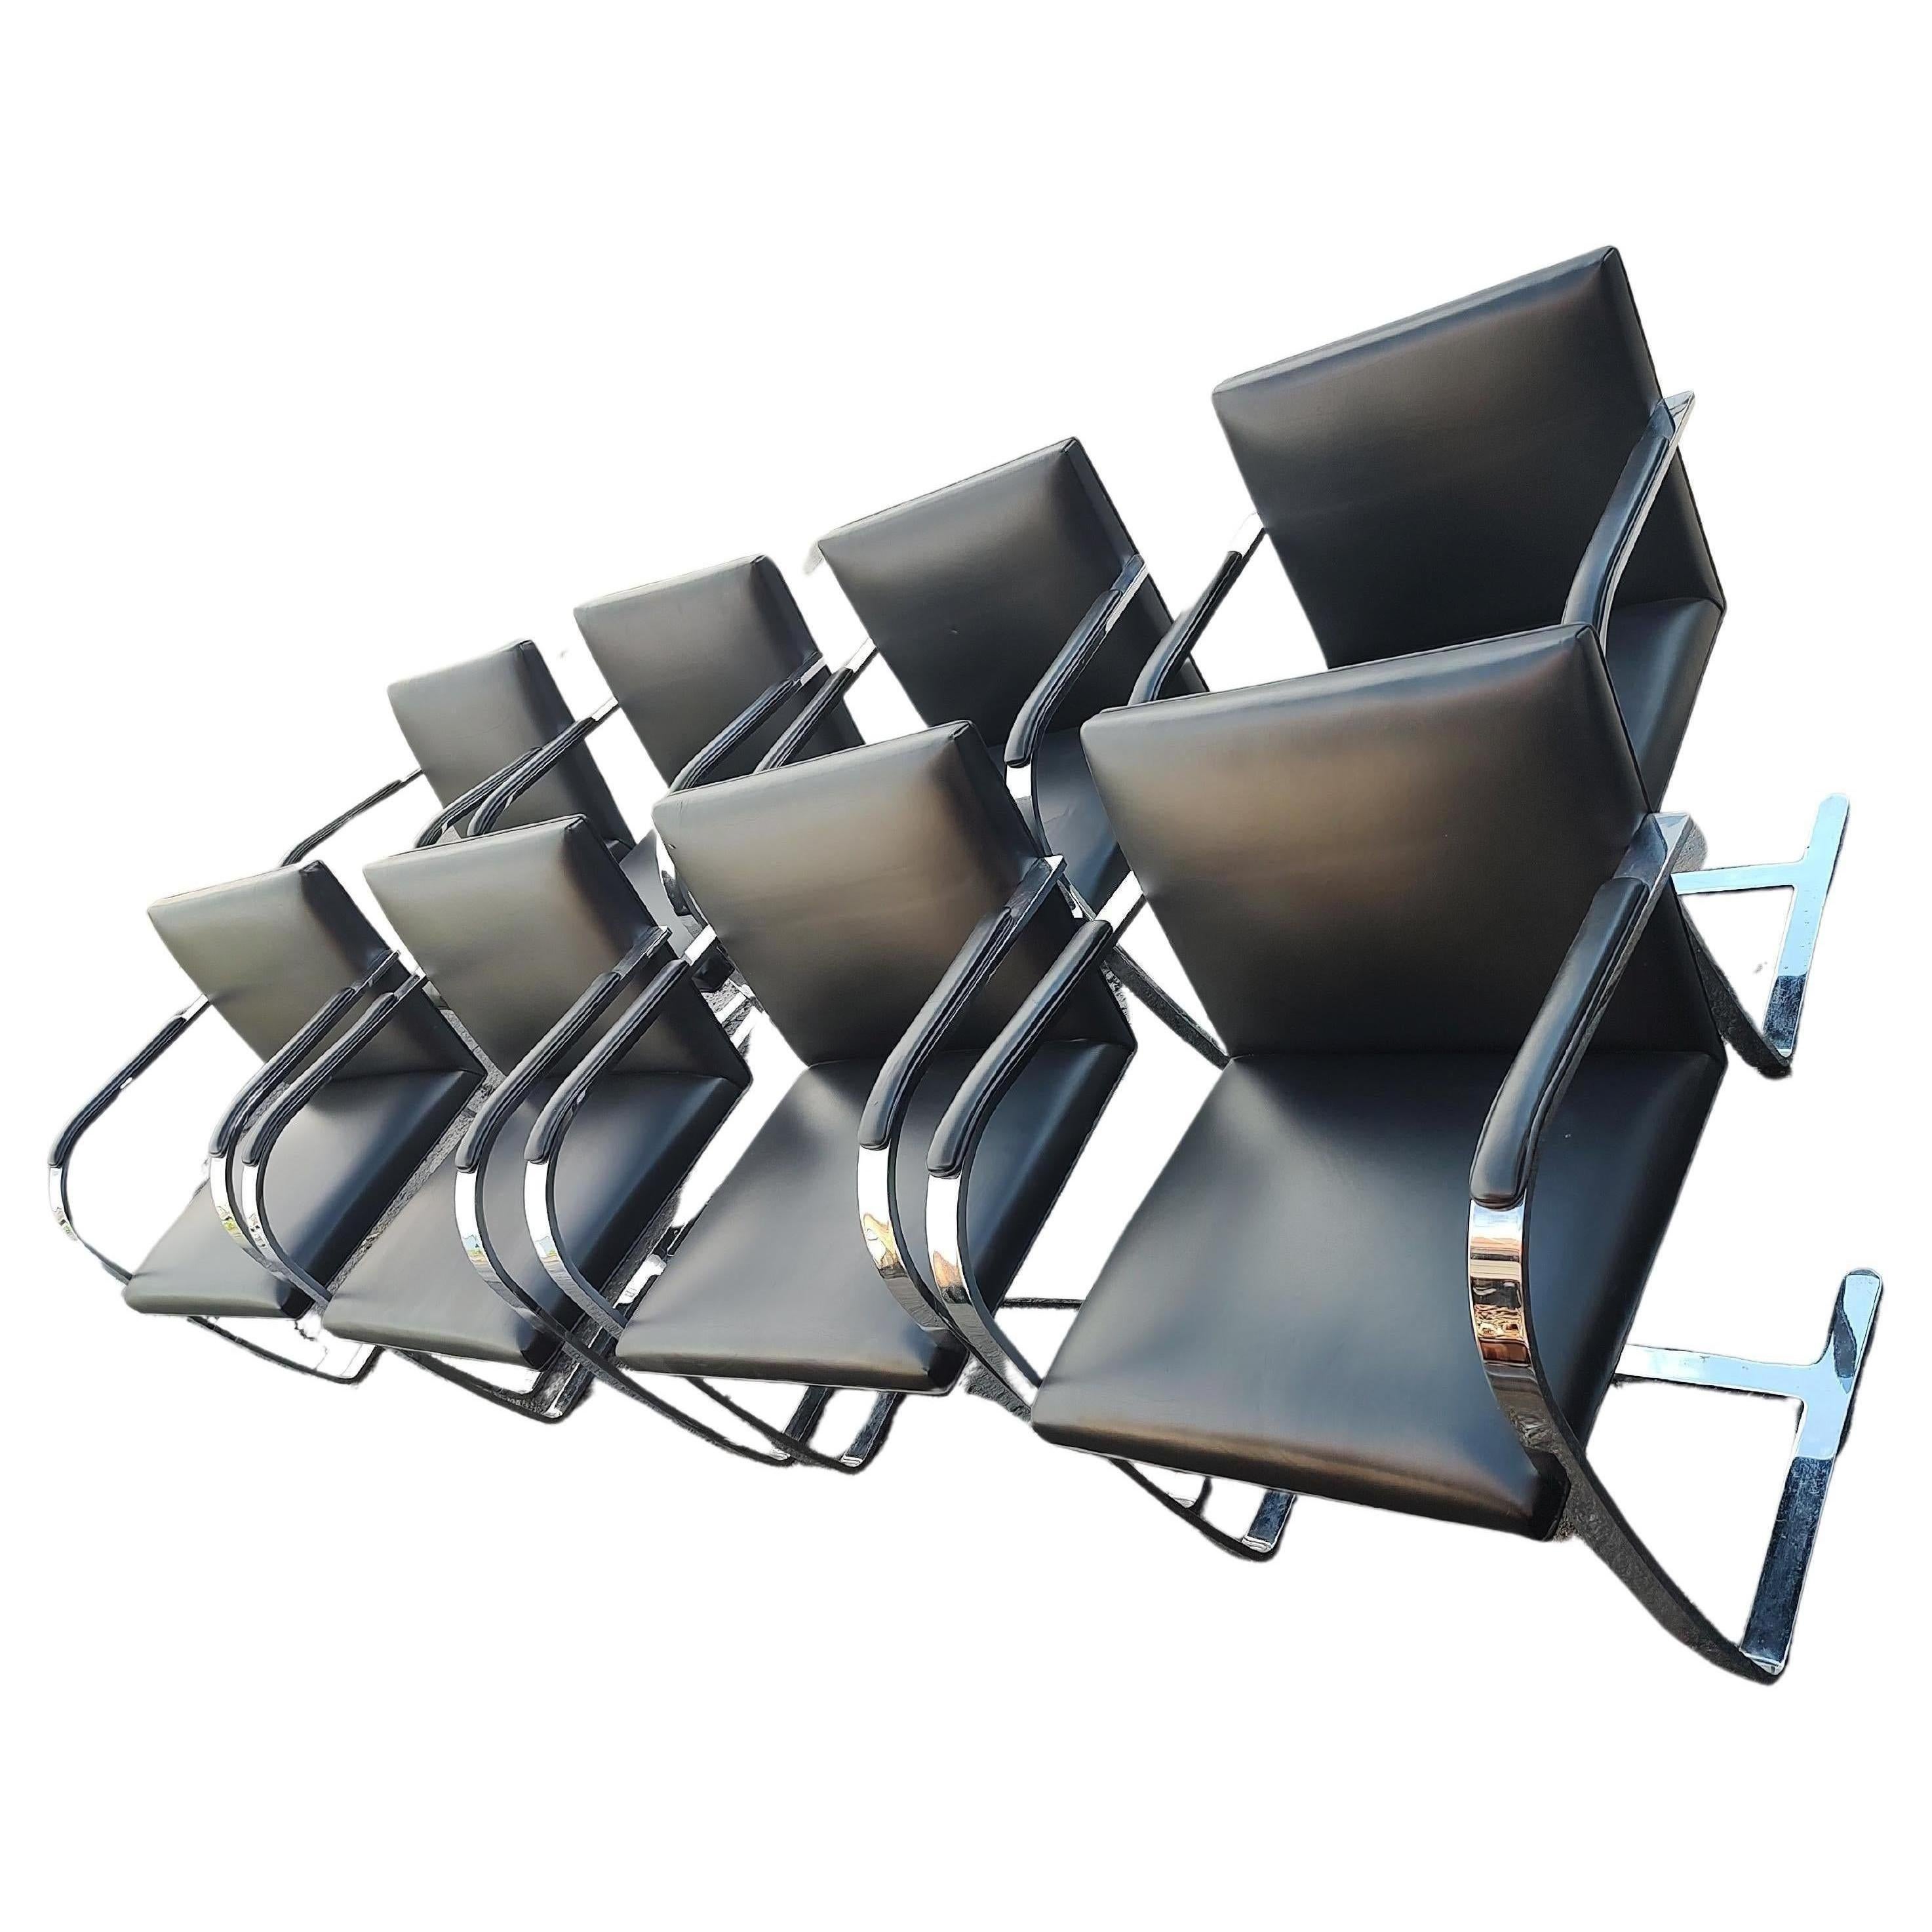 Fantastic set of 8 flat bar Brno chairs designed by Ludwig Mies van der Rohe in the twenties. Currently made and produced by Knoll Studio. All 8 are signed on the undersides of the chairs. Black Leather is in excellent vintage condition with minimal